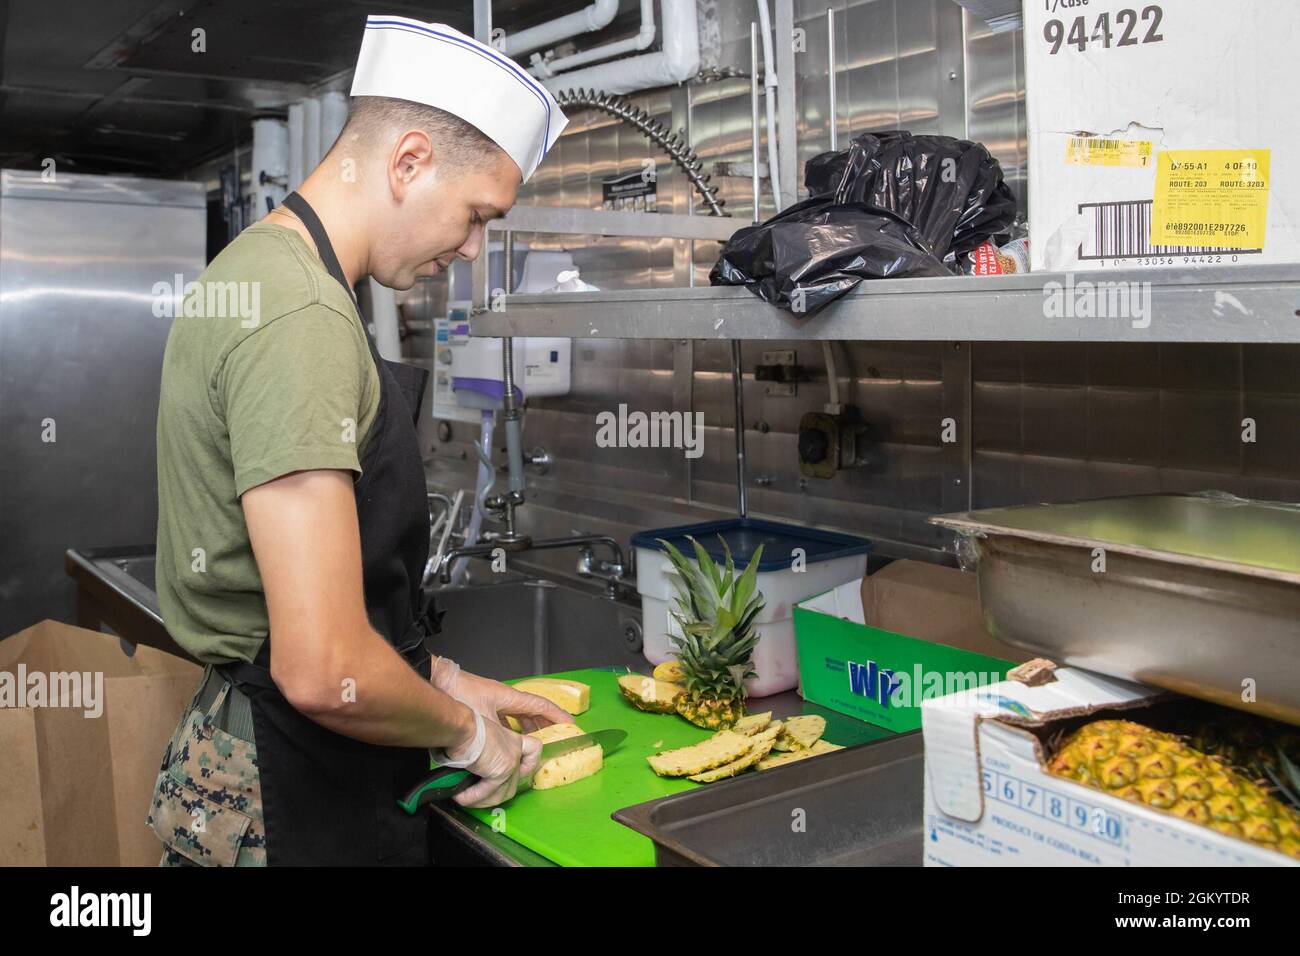 210731-N-JB637-1036 ATLANTIC OCEAN (July 31, 2021) U.S. Marine Corps Cpl. Cristian Puente, a food service specialist assigned to the 22nd Marine Expeditionary Unit, prepares fresh fruit aboard the Wasp-class amphibious assault ship USS Kearsarge (LHD 3) July 31, 2021. Embarked Marines integrate with the ship’s crew to support daily operations while underway. Stock Photo